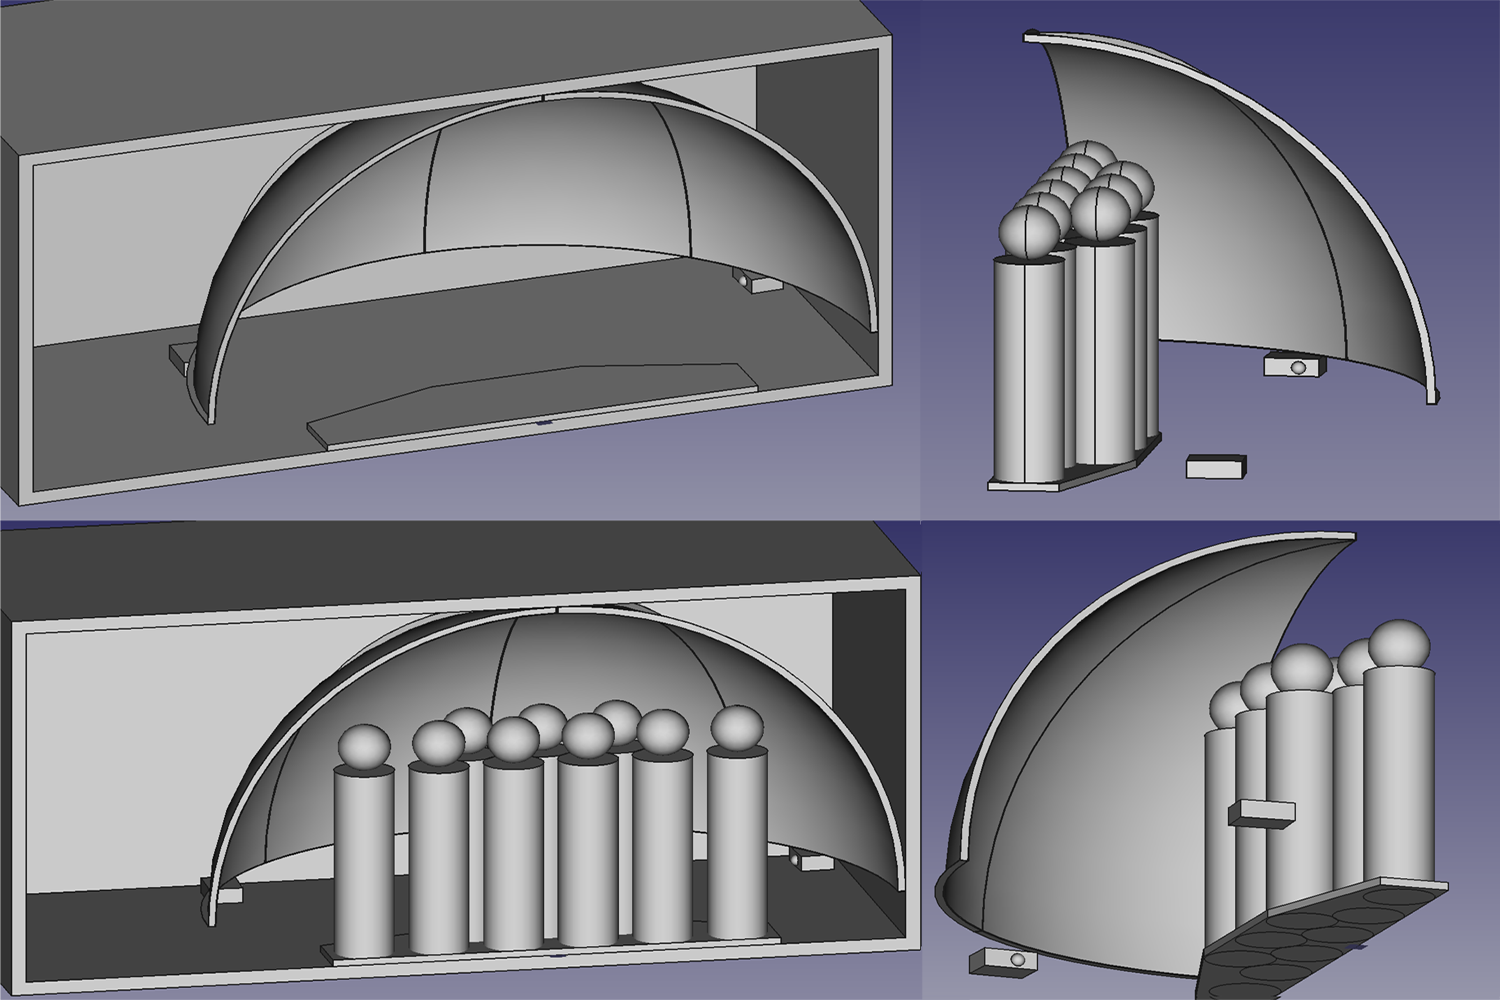 Dome container